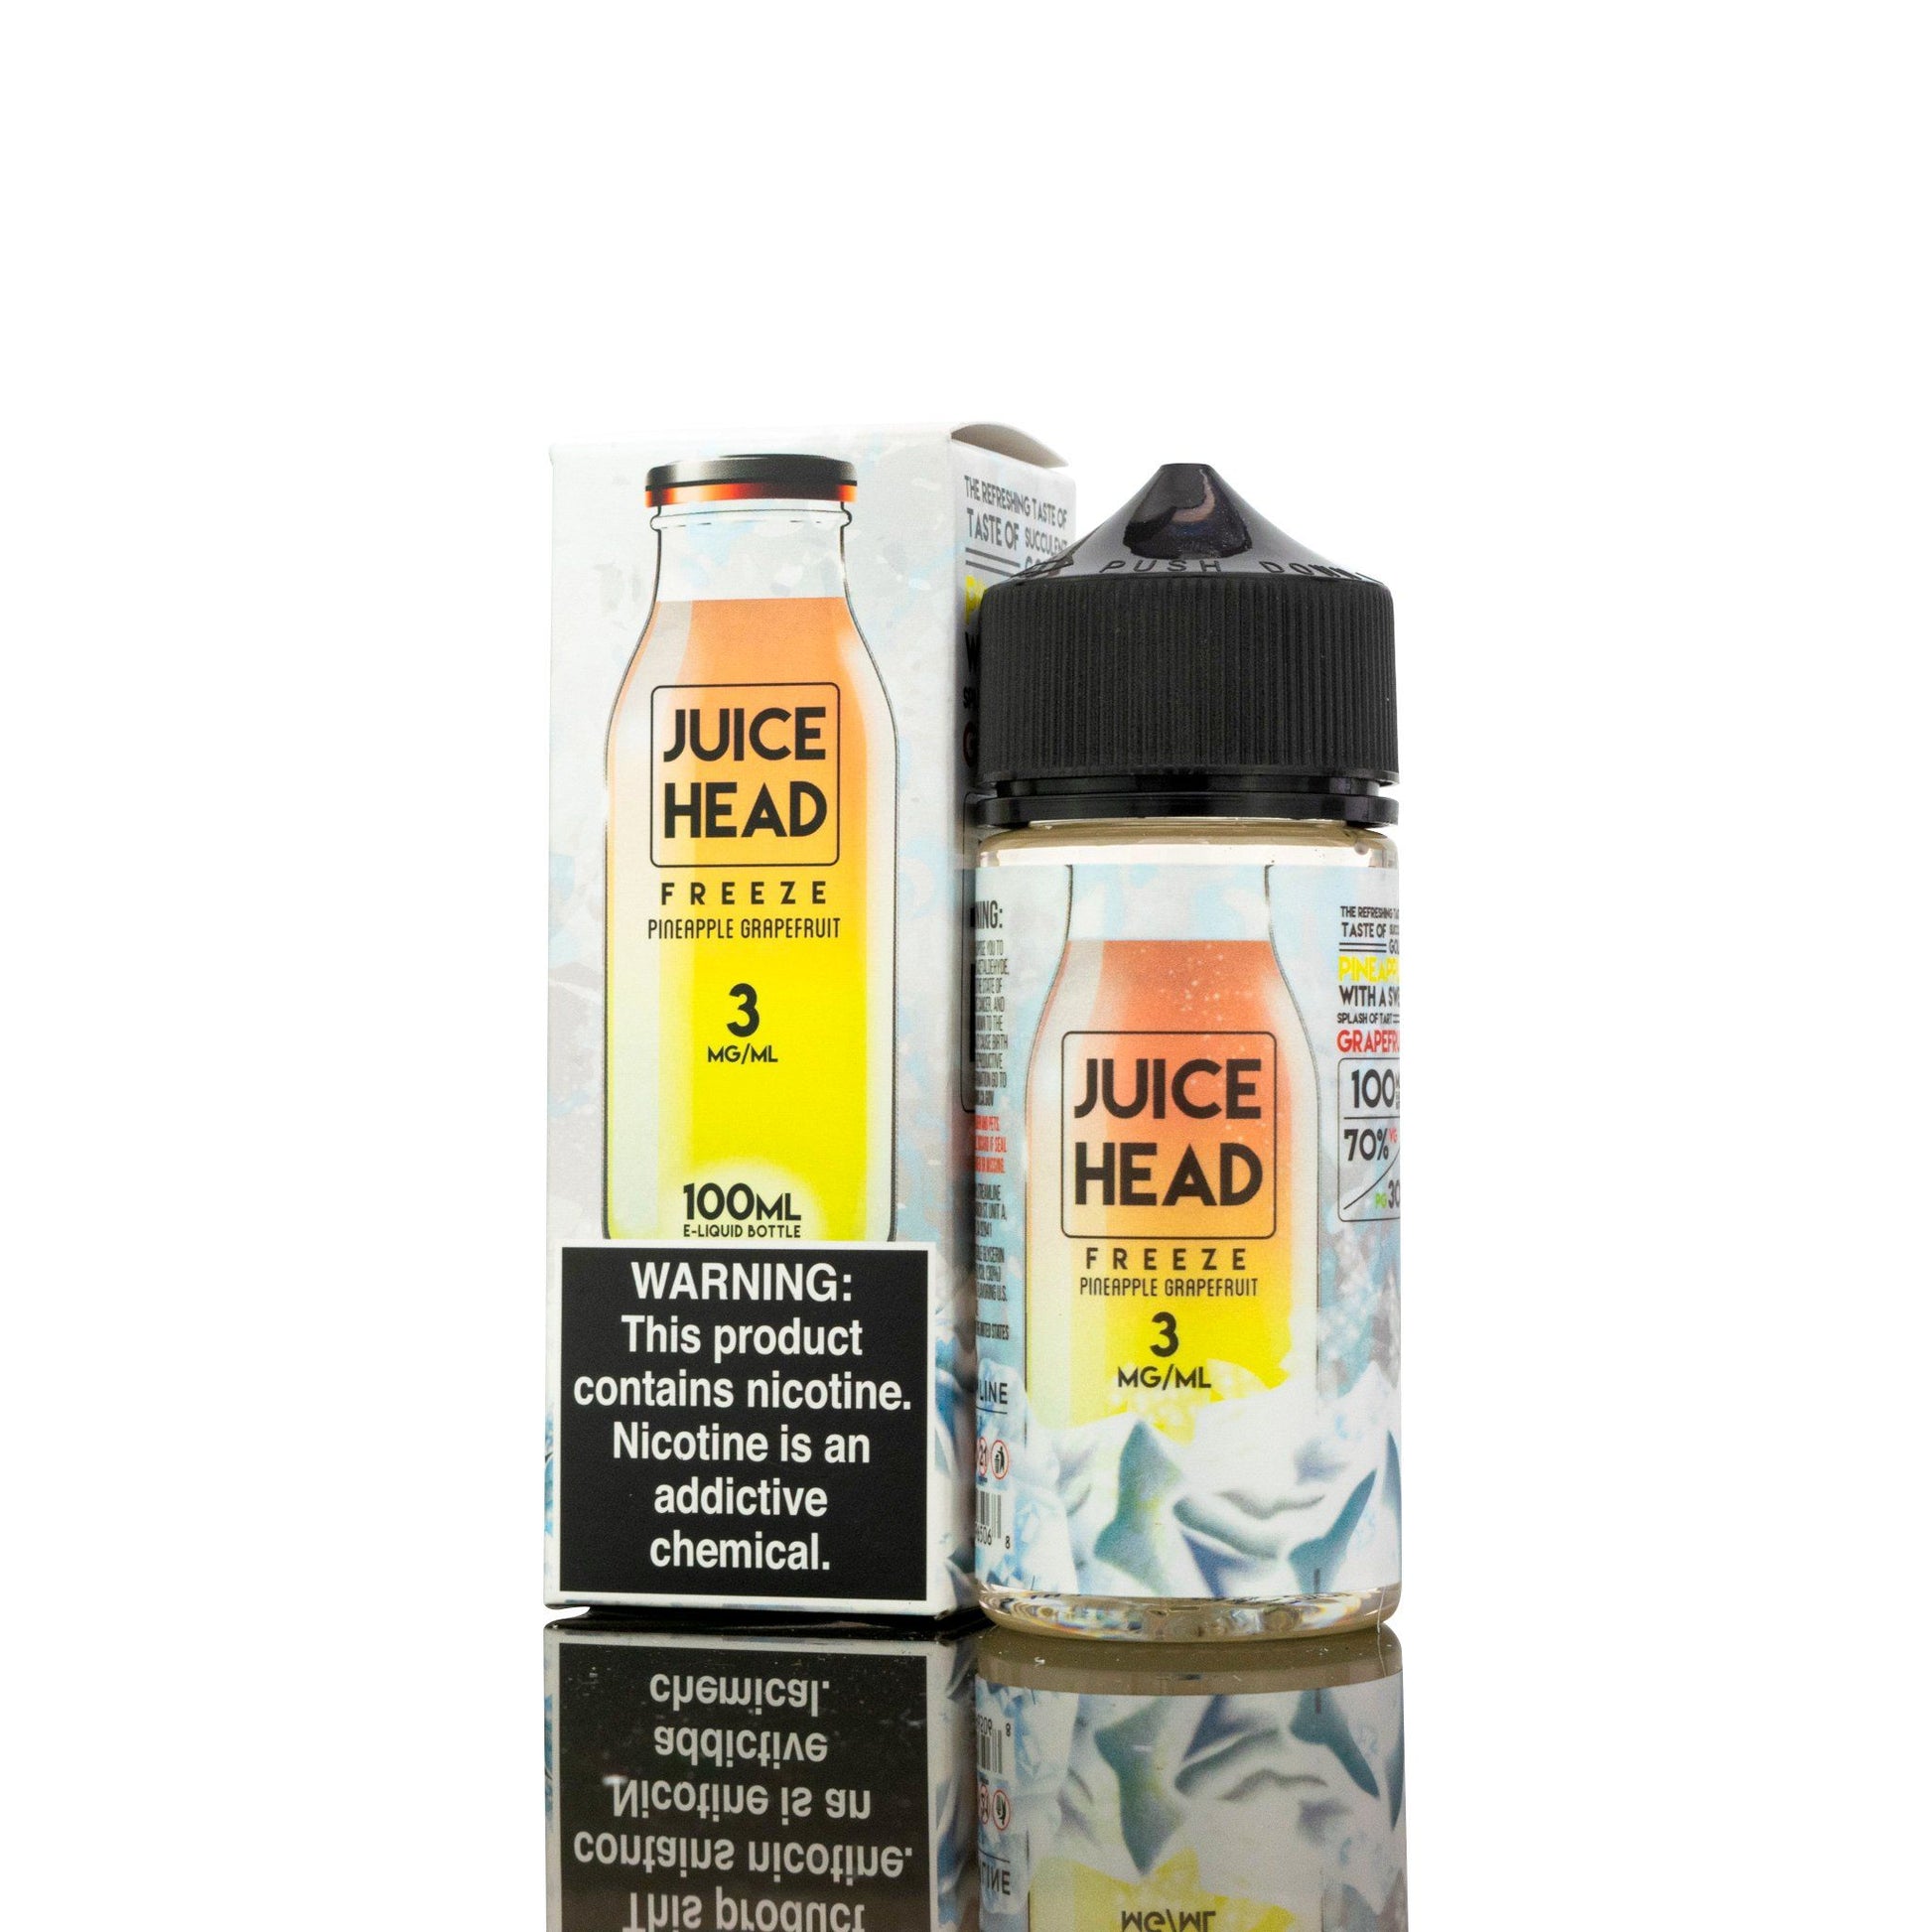 Pineapple Grapefruit Freeze by Juice Head Series 100ml with Packaging